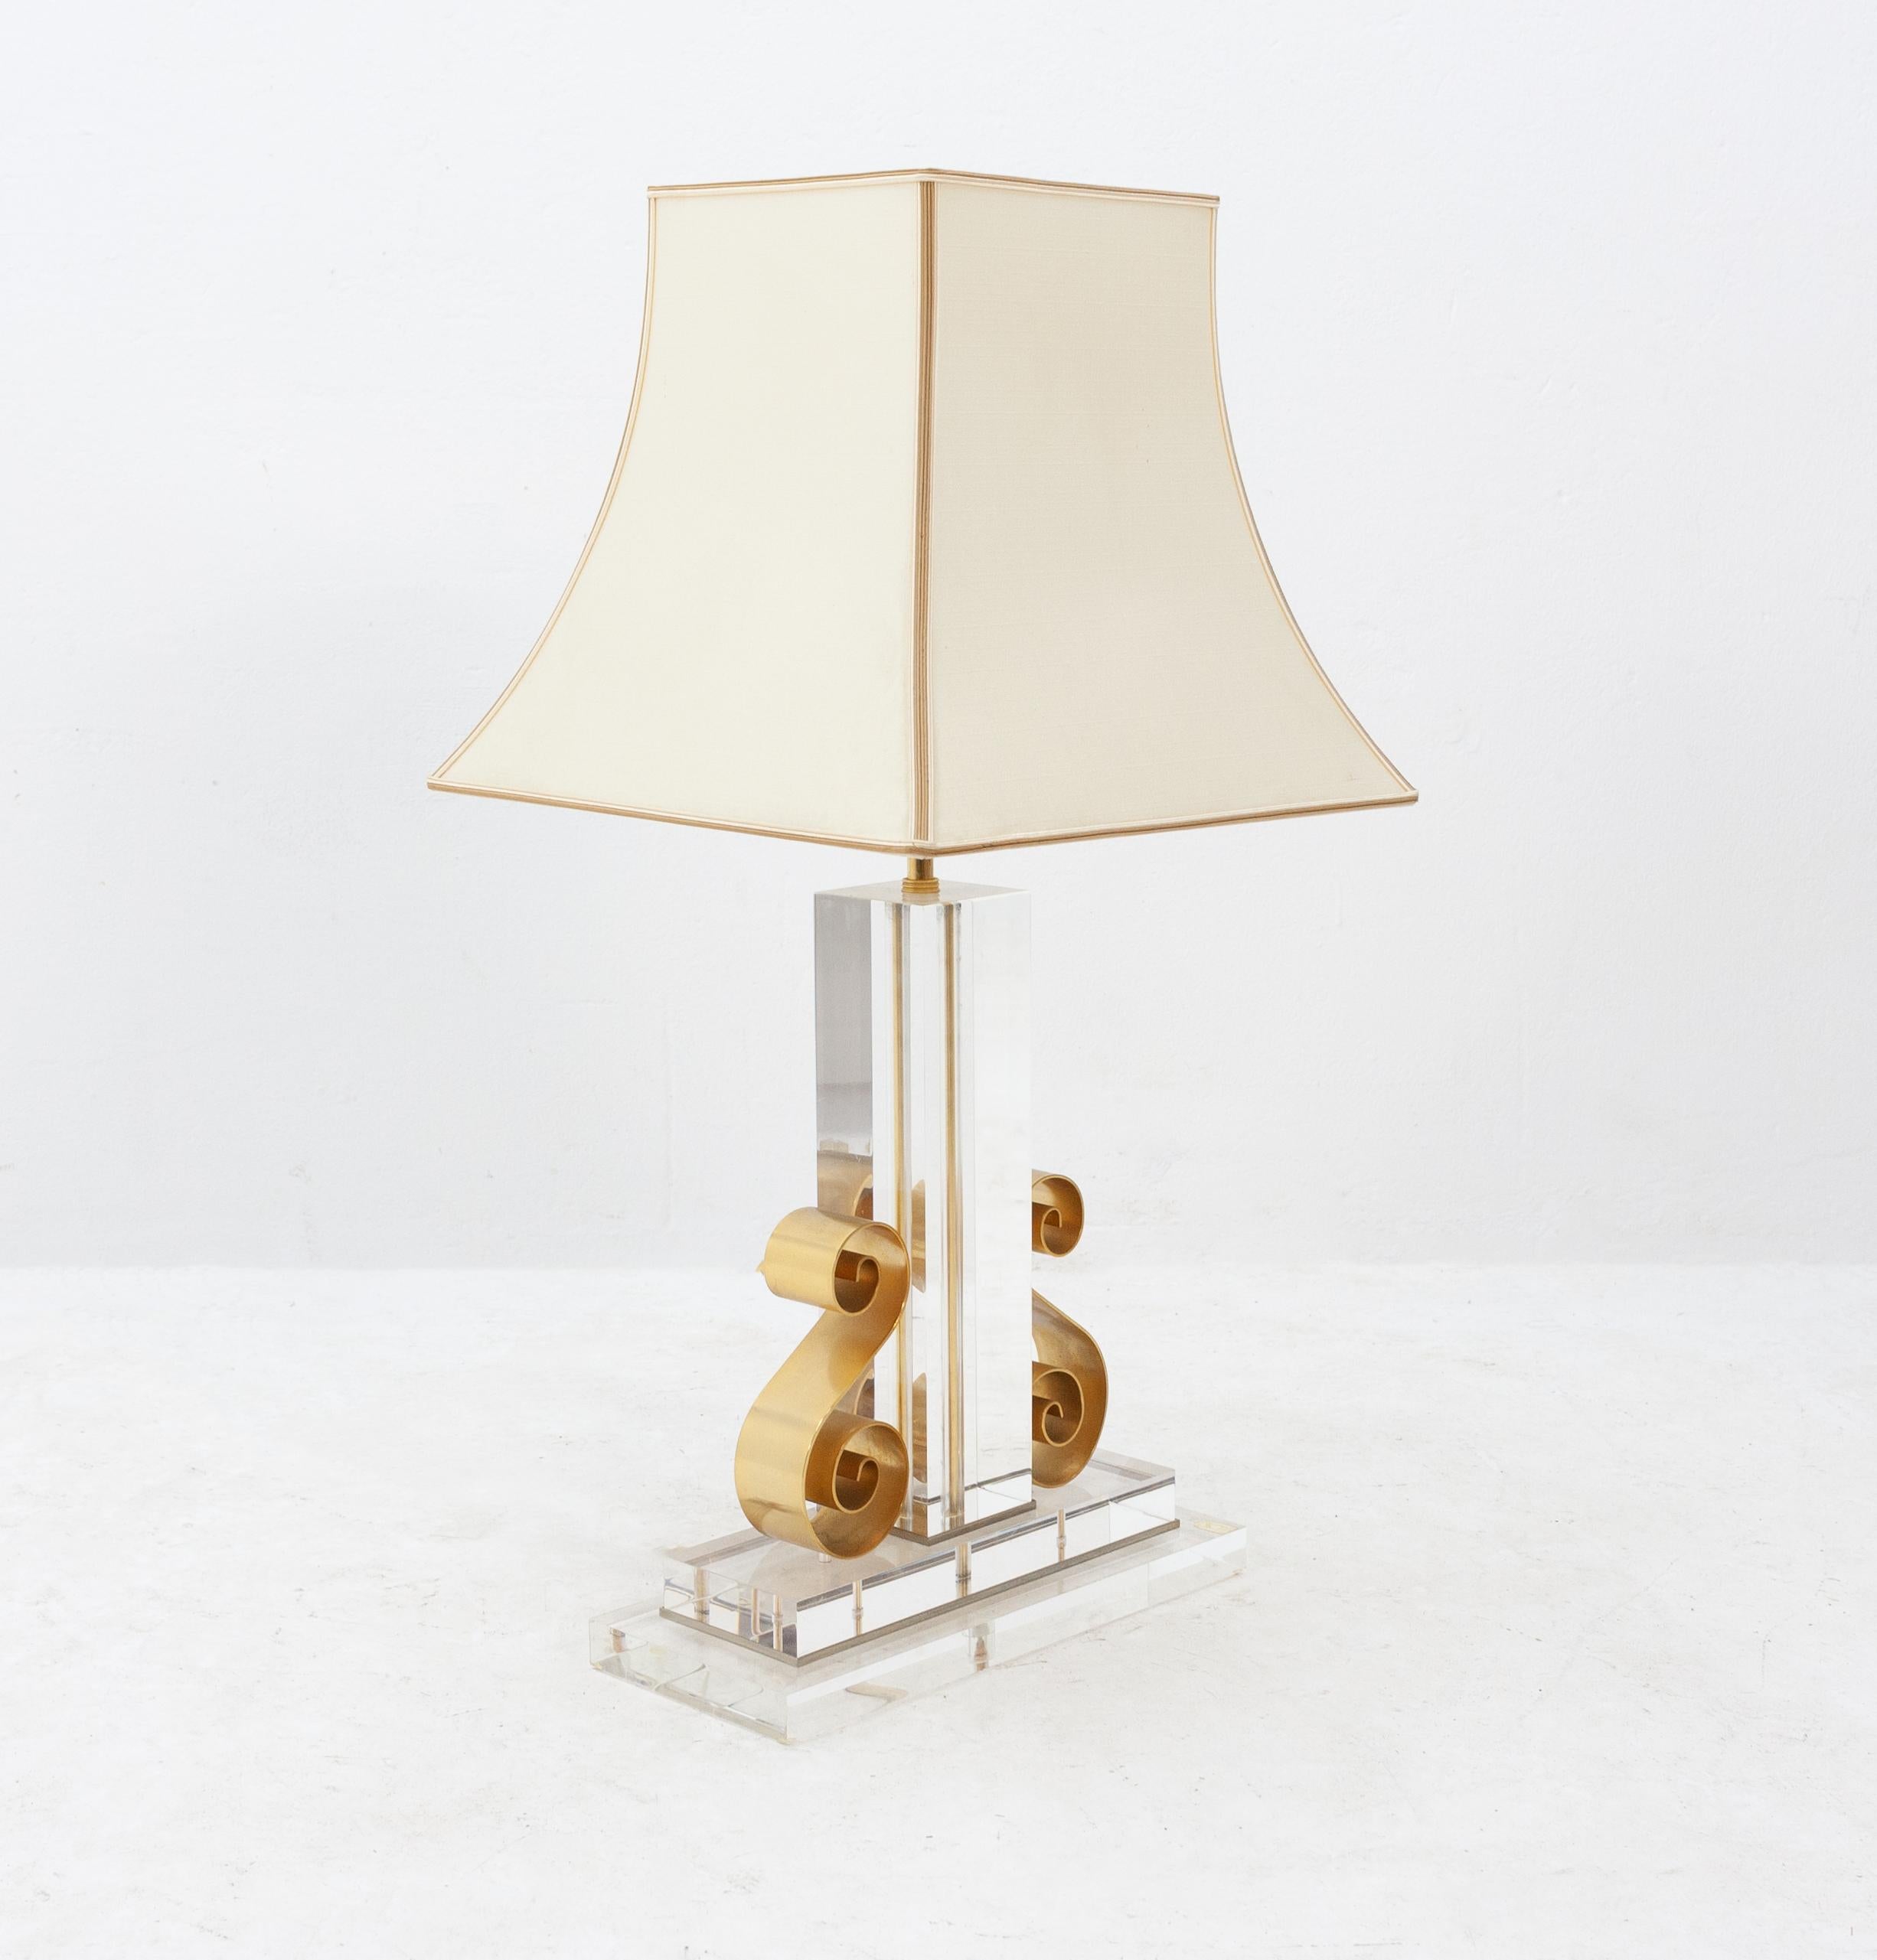 Hollywood Regency Lucite table lamp. Sold by Cascades Scheveningen, Holland 1970s
Solid Lucite with two golden aluminum S shape ornaments. With the original silk hood.
Very good condition overall.